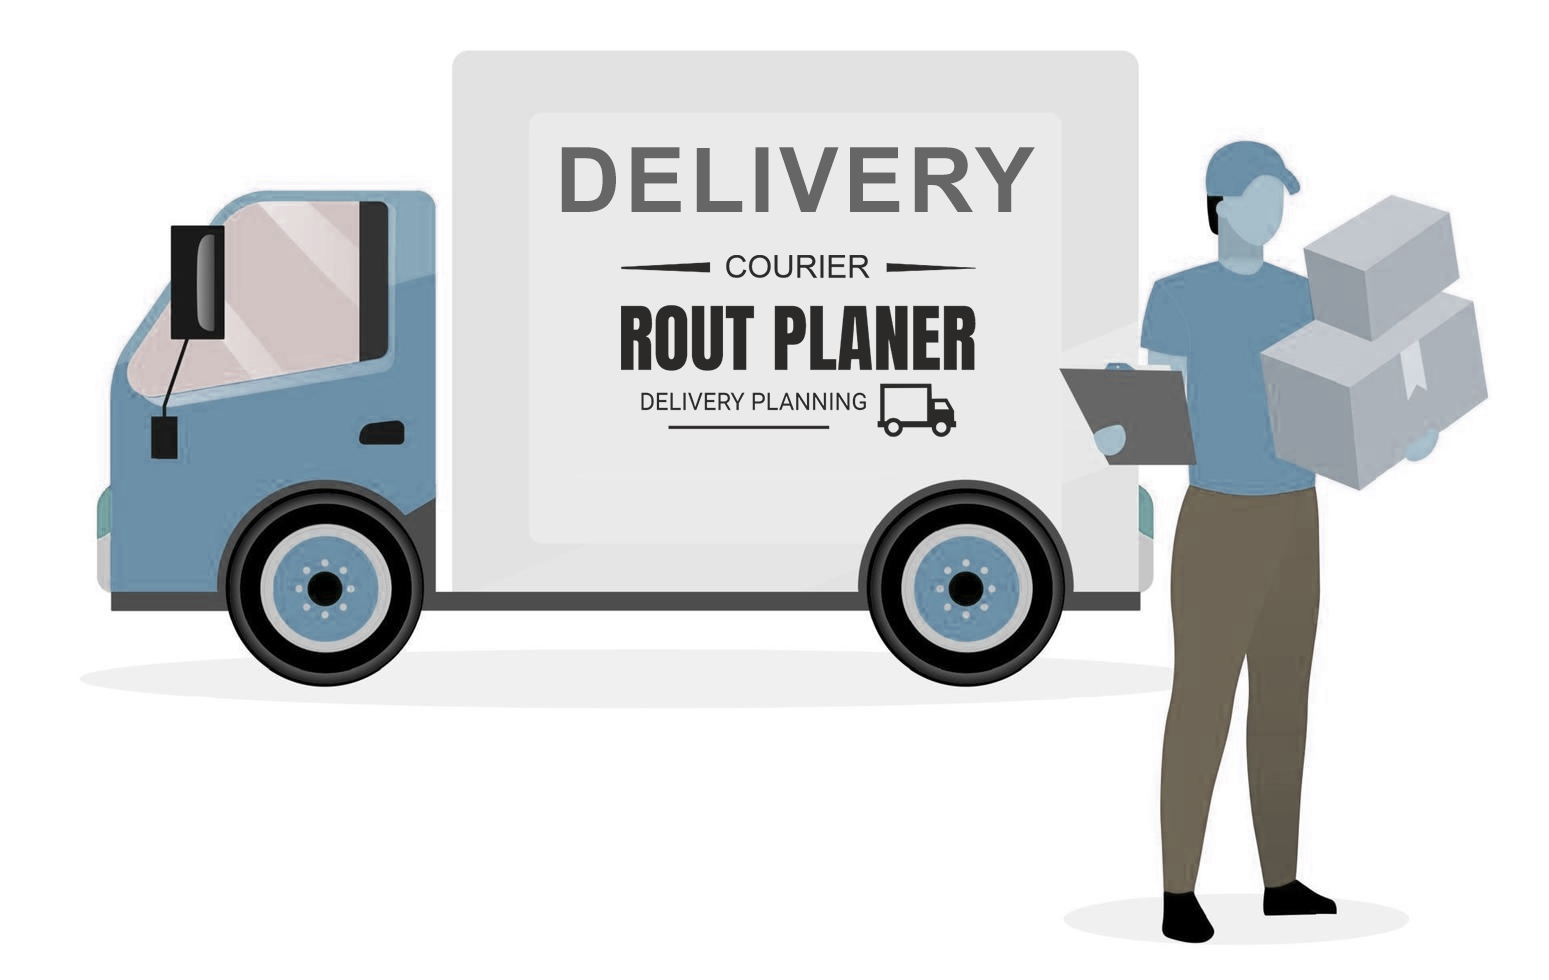 Any business Can Now Offer e-Commerce Delivery With RoutPlaner Delivery Management System